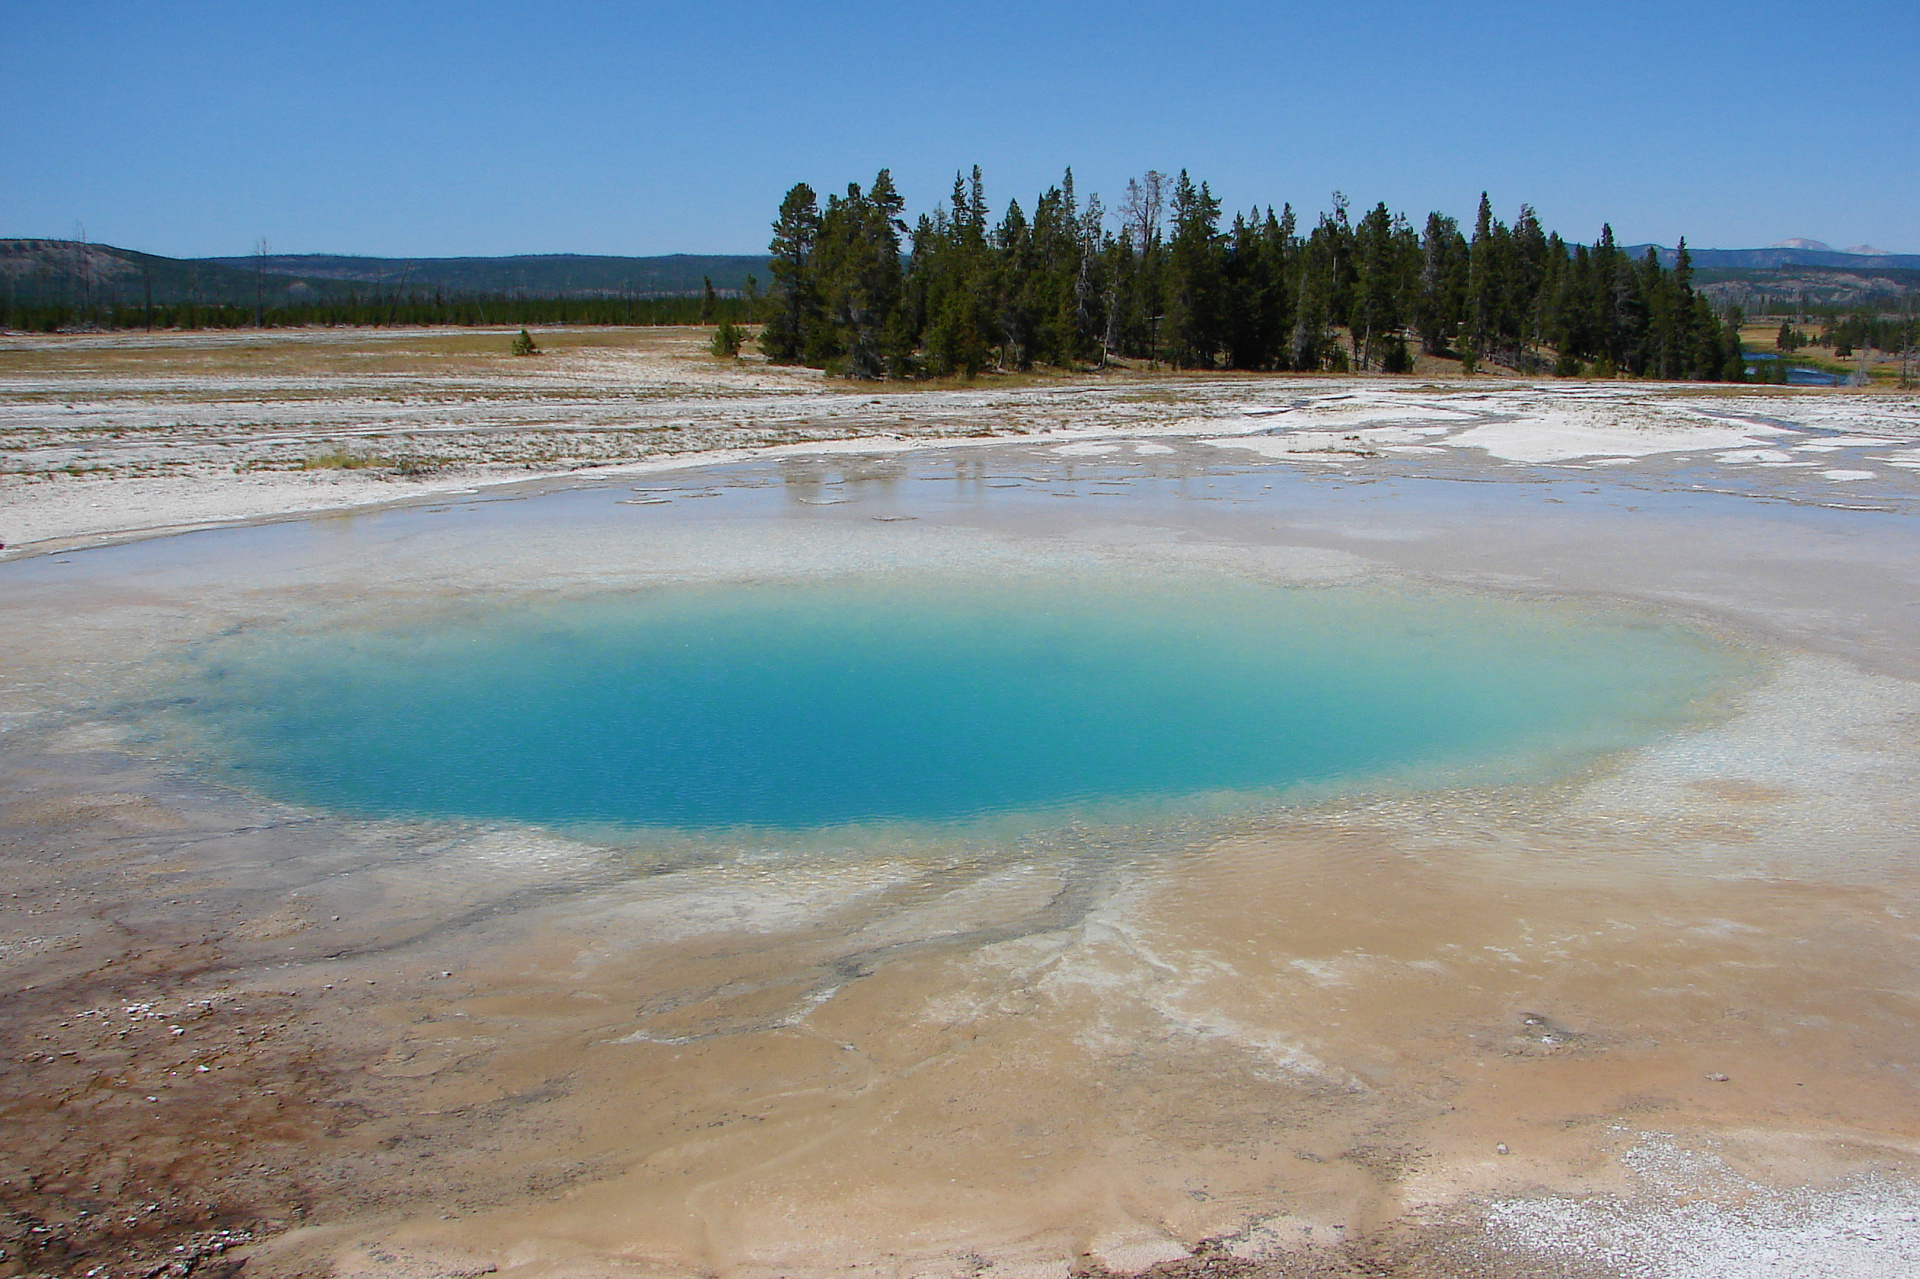 Opal Pool (Travels » US Trip 1: Cheyenne Country » The Journey » Yellowstone National Park » Geysers, Hot Springs and Lakes » Midway Geyser Basin)